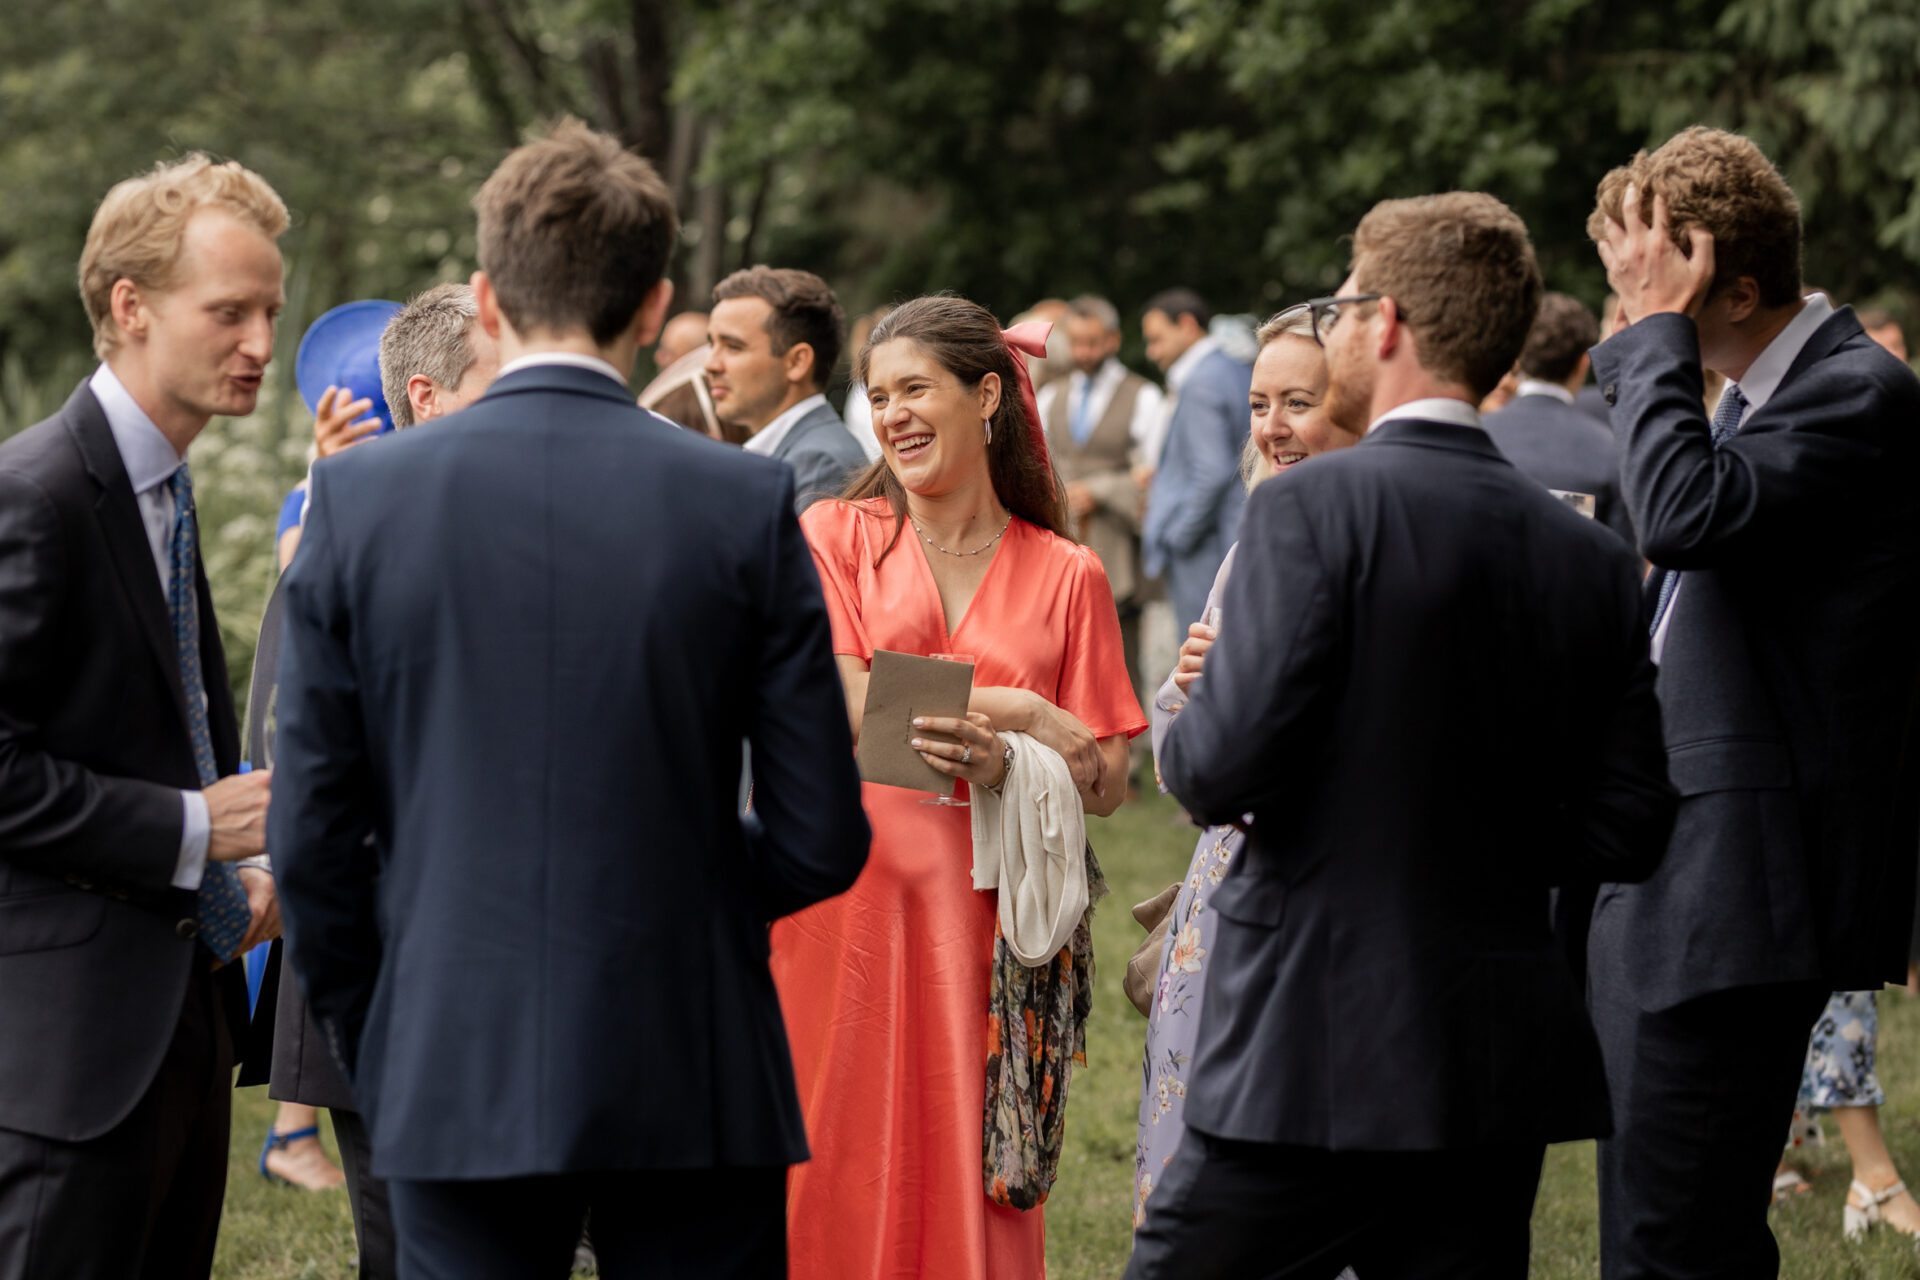 Guests converse during the drinks reception at this Devon marquee wedding